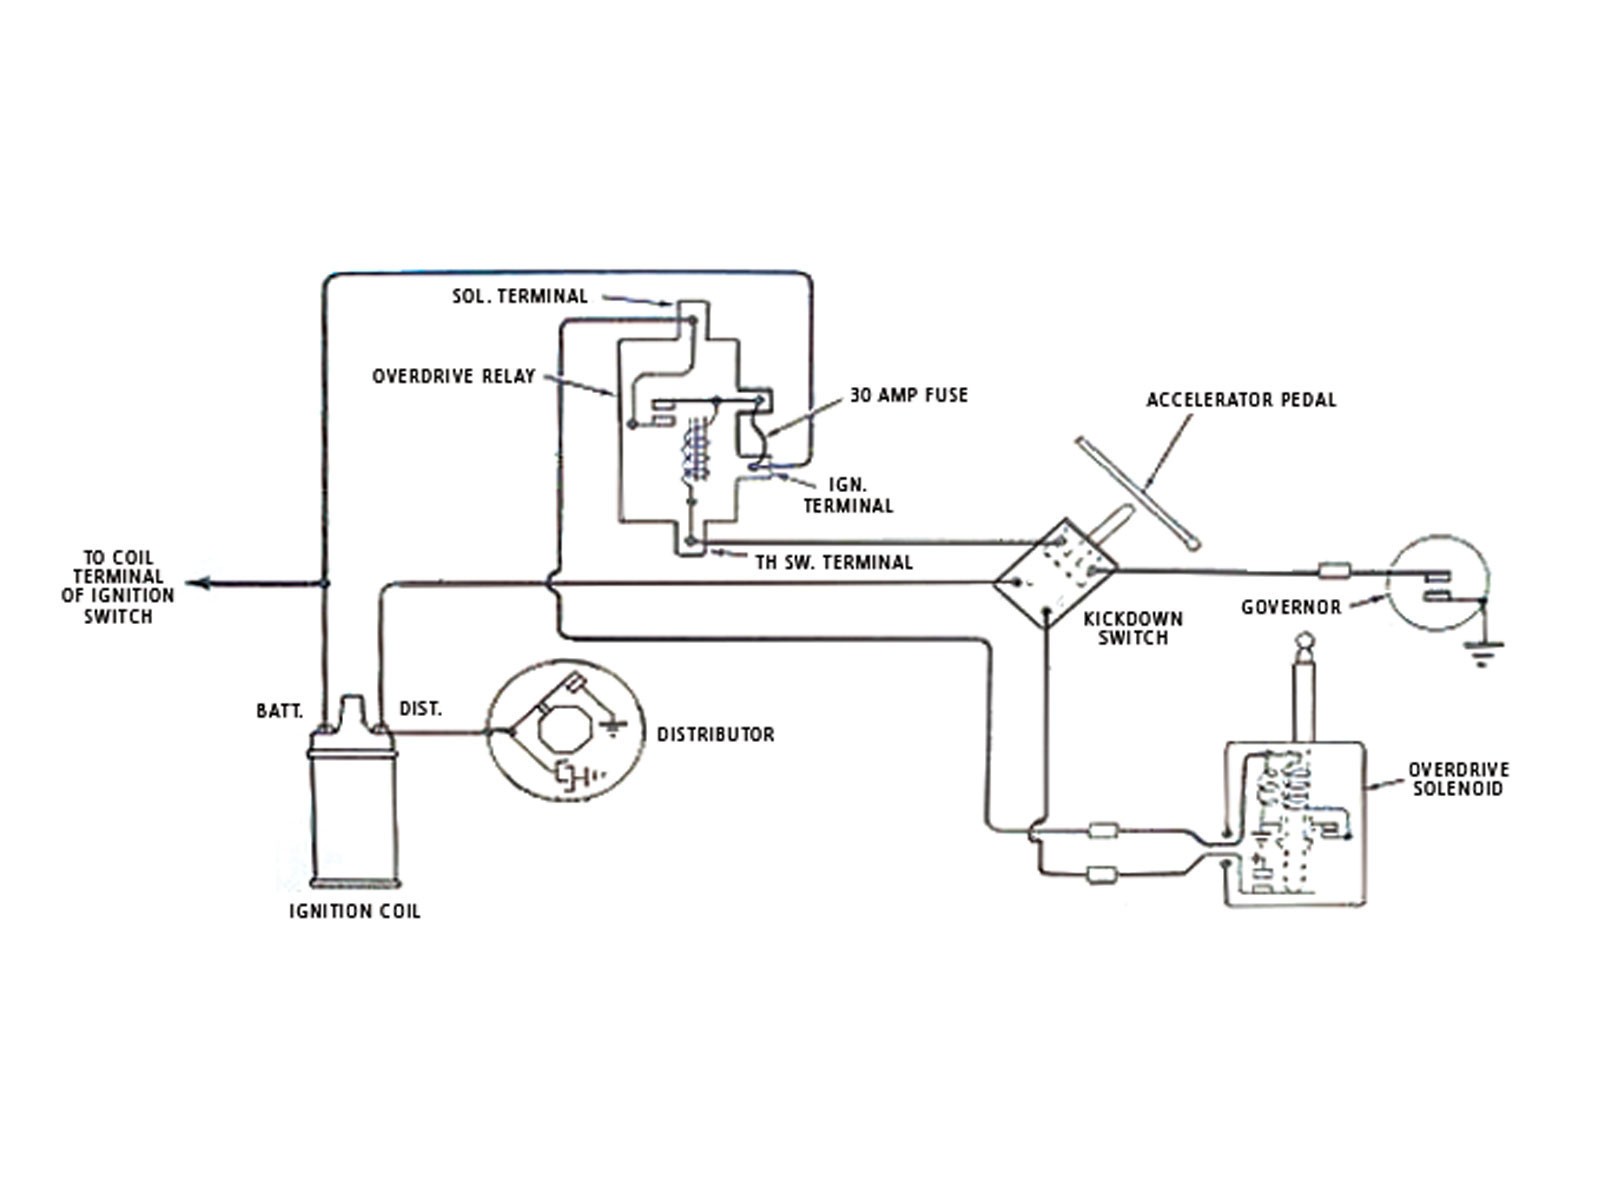 Wiring Diagram For Pilz Safety Relay Valid Perfect Ab Safety Relay